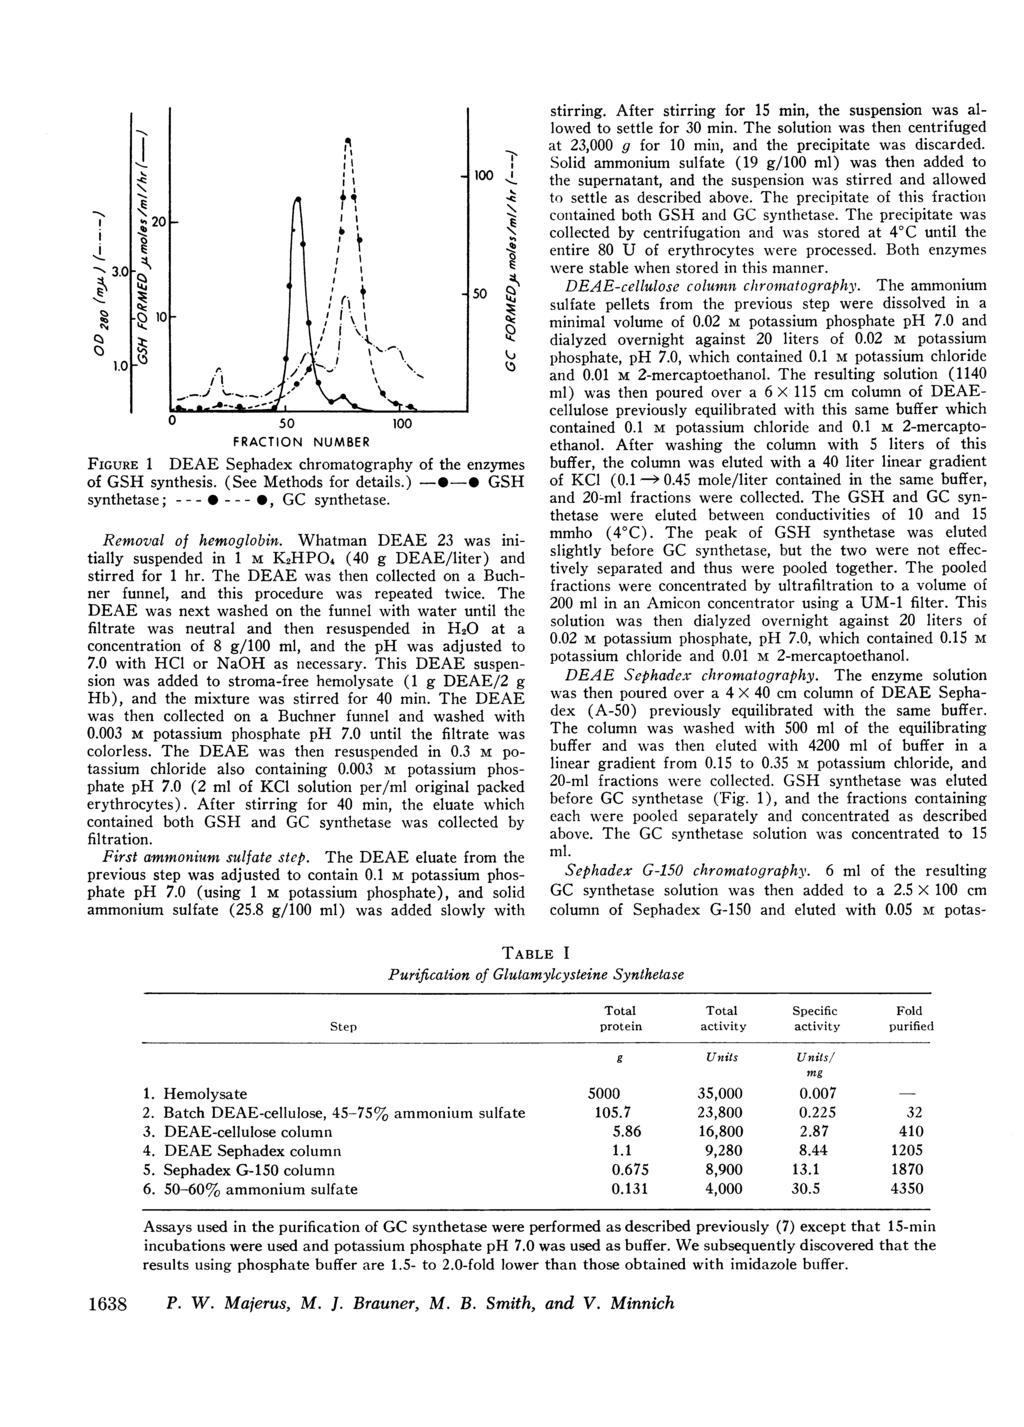 -, 3.0 0-1.0 I-e Nq, :4' *0 50 100 FRACTION NUMBER FIGURE 1 DEAE Sephadex chromatography of the enzymes of GSH synthesis. (See Methods for details.) -*-- GSH synthetase; -- - * - - - 0, GC synthetase.